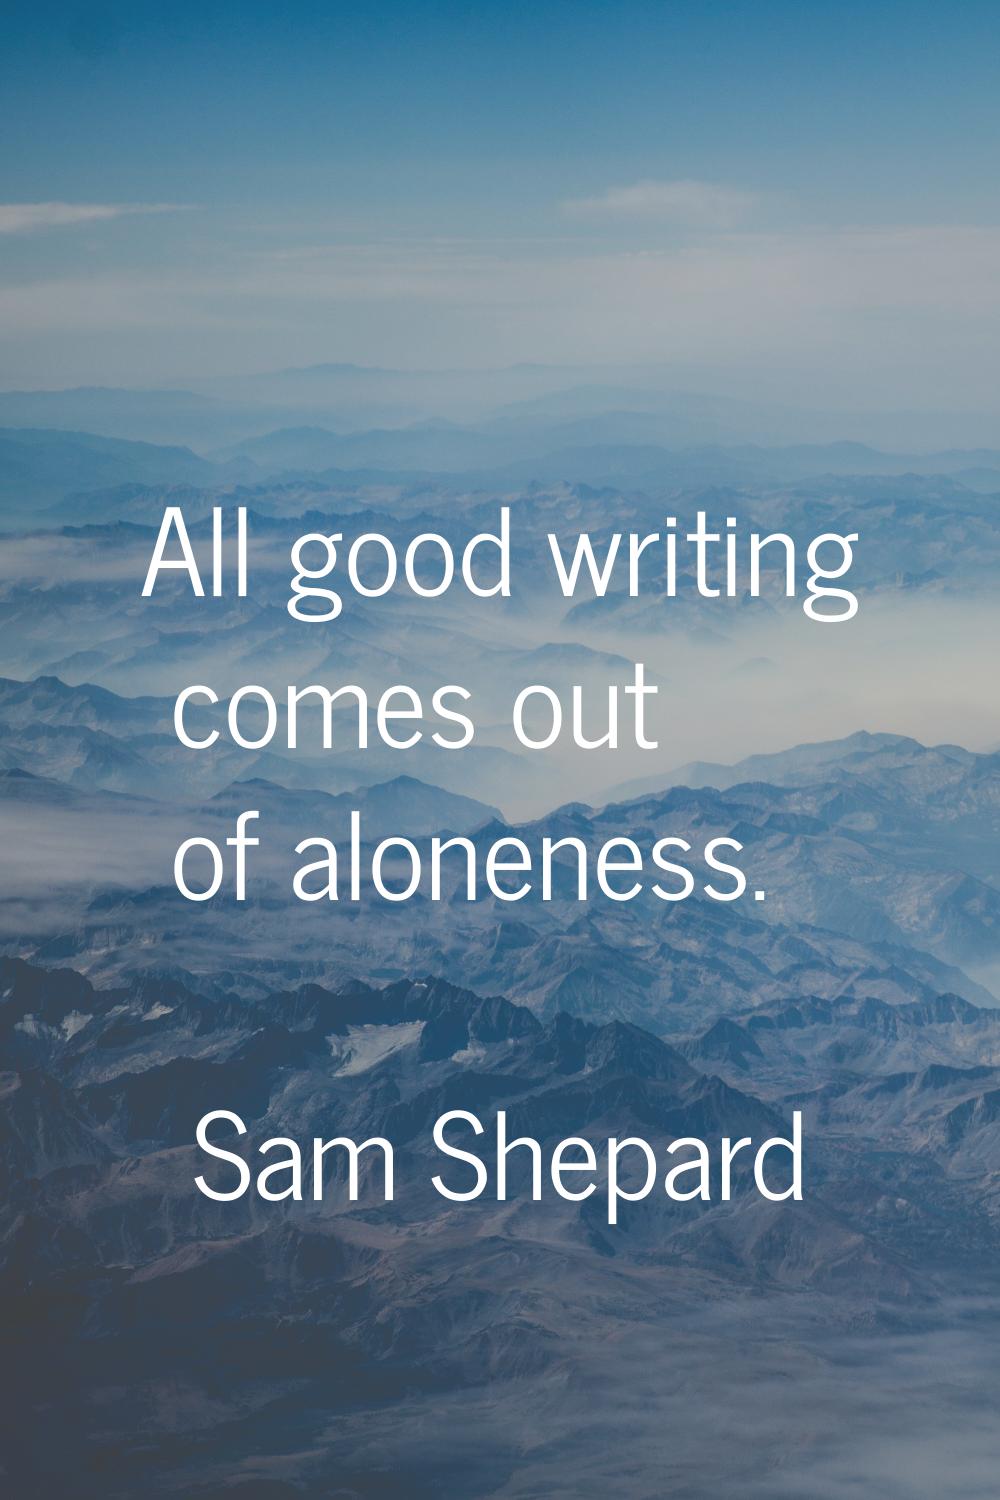 All good writing comes out of aloneness.